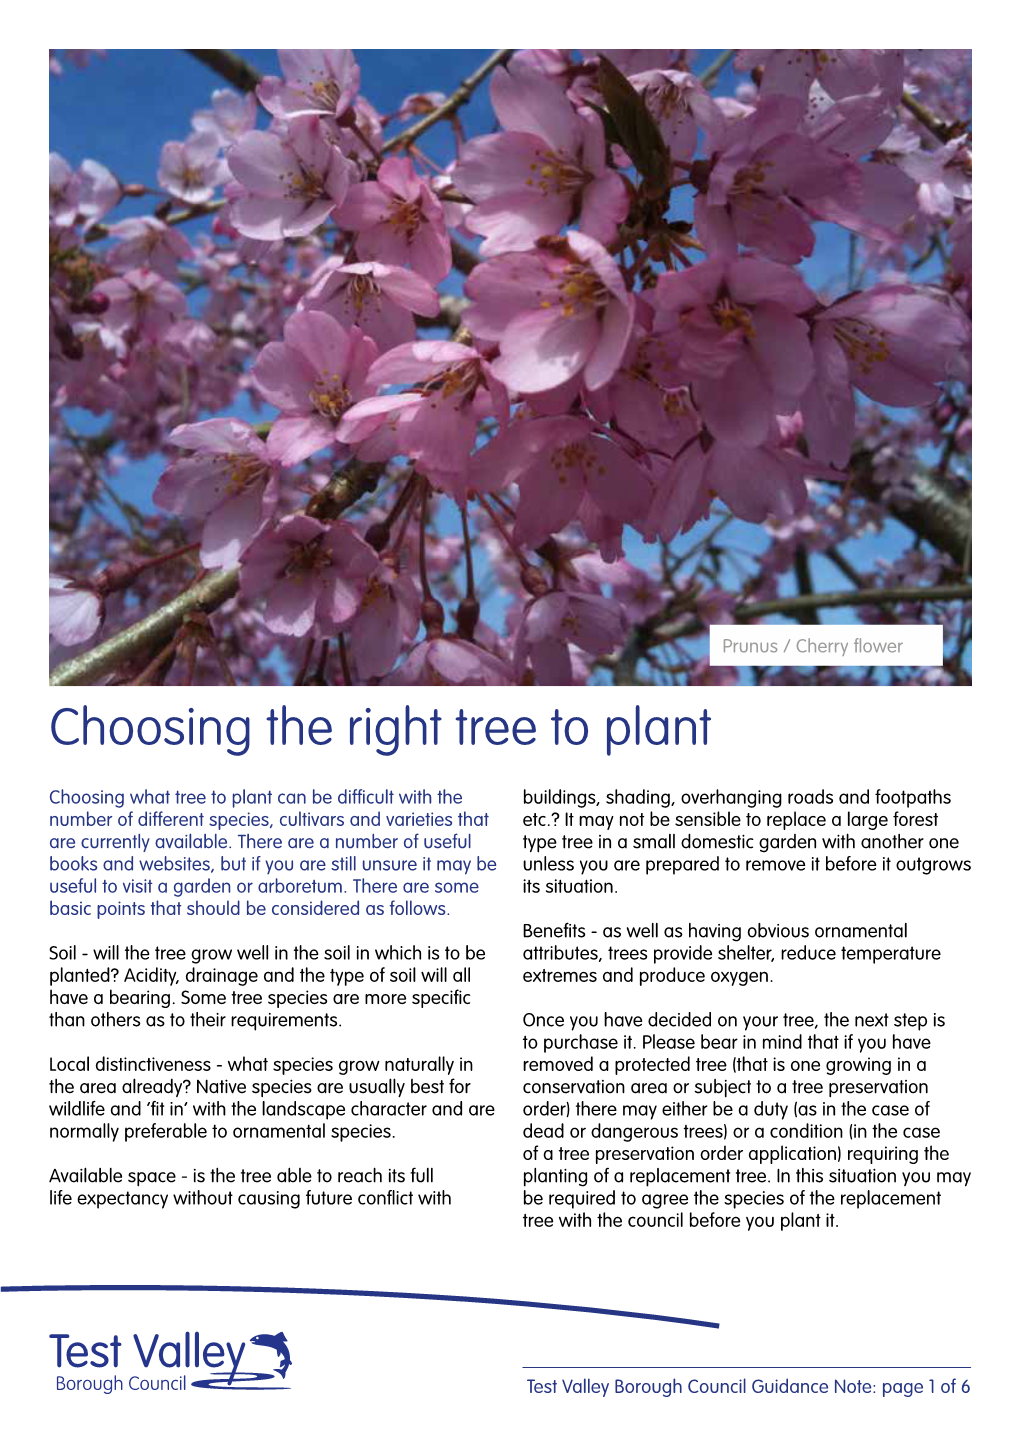 Choosing the Right Tree to Plant